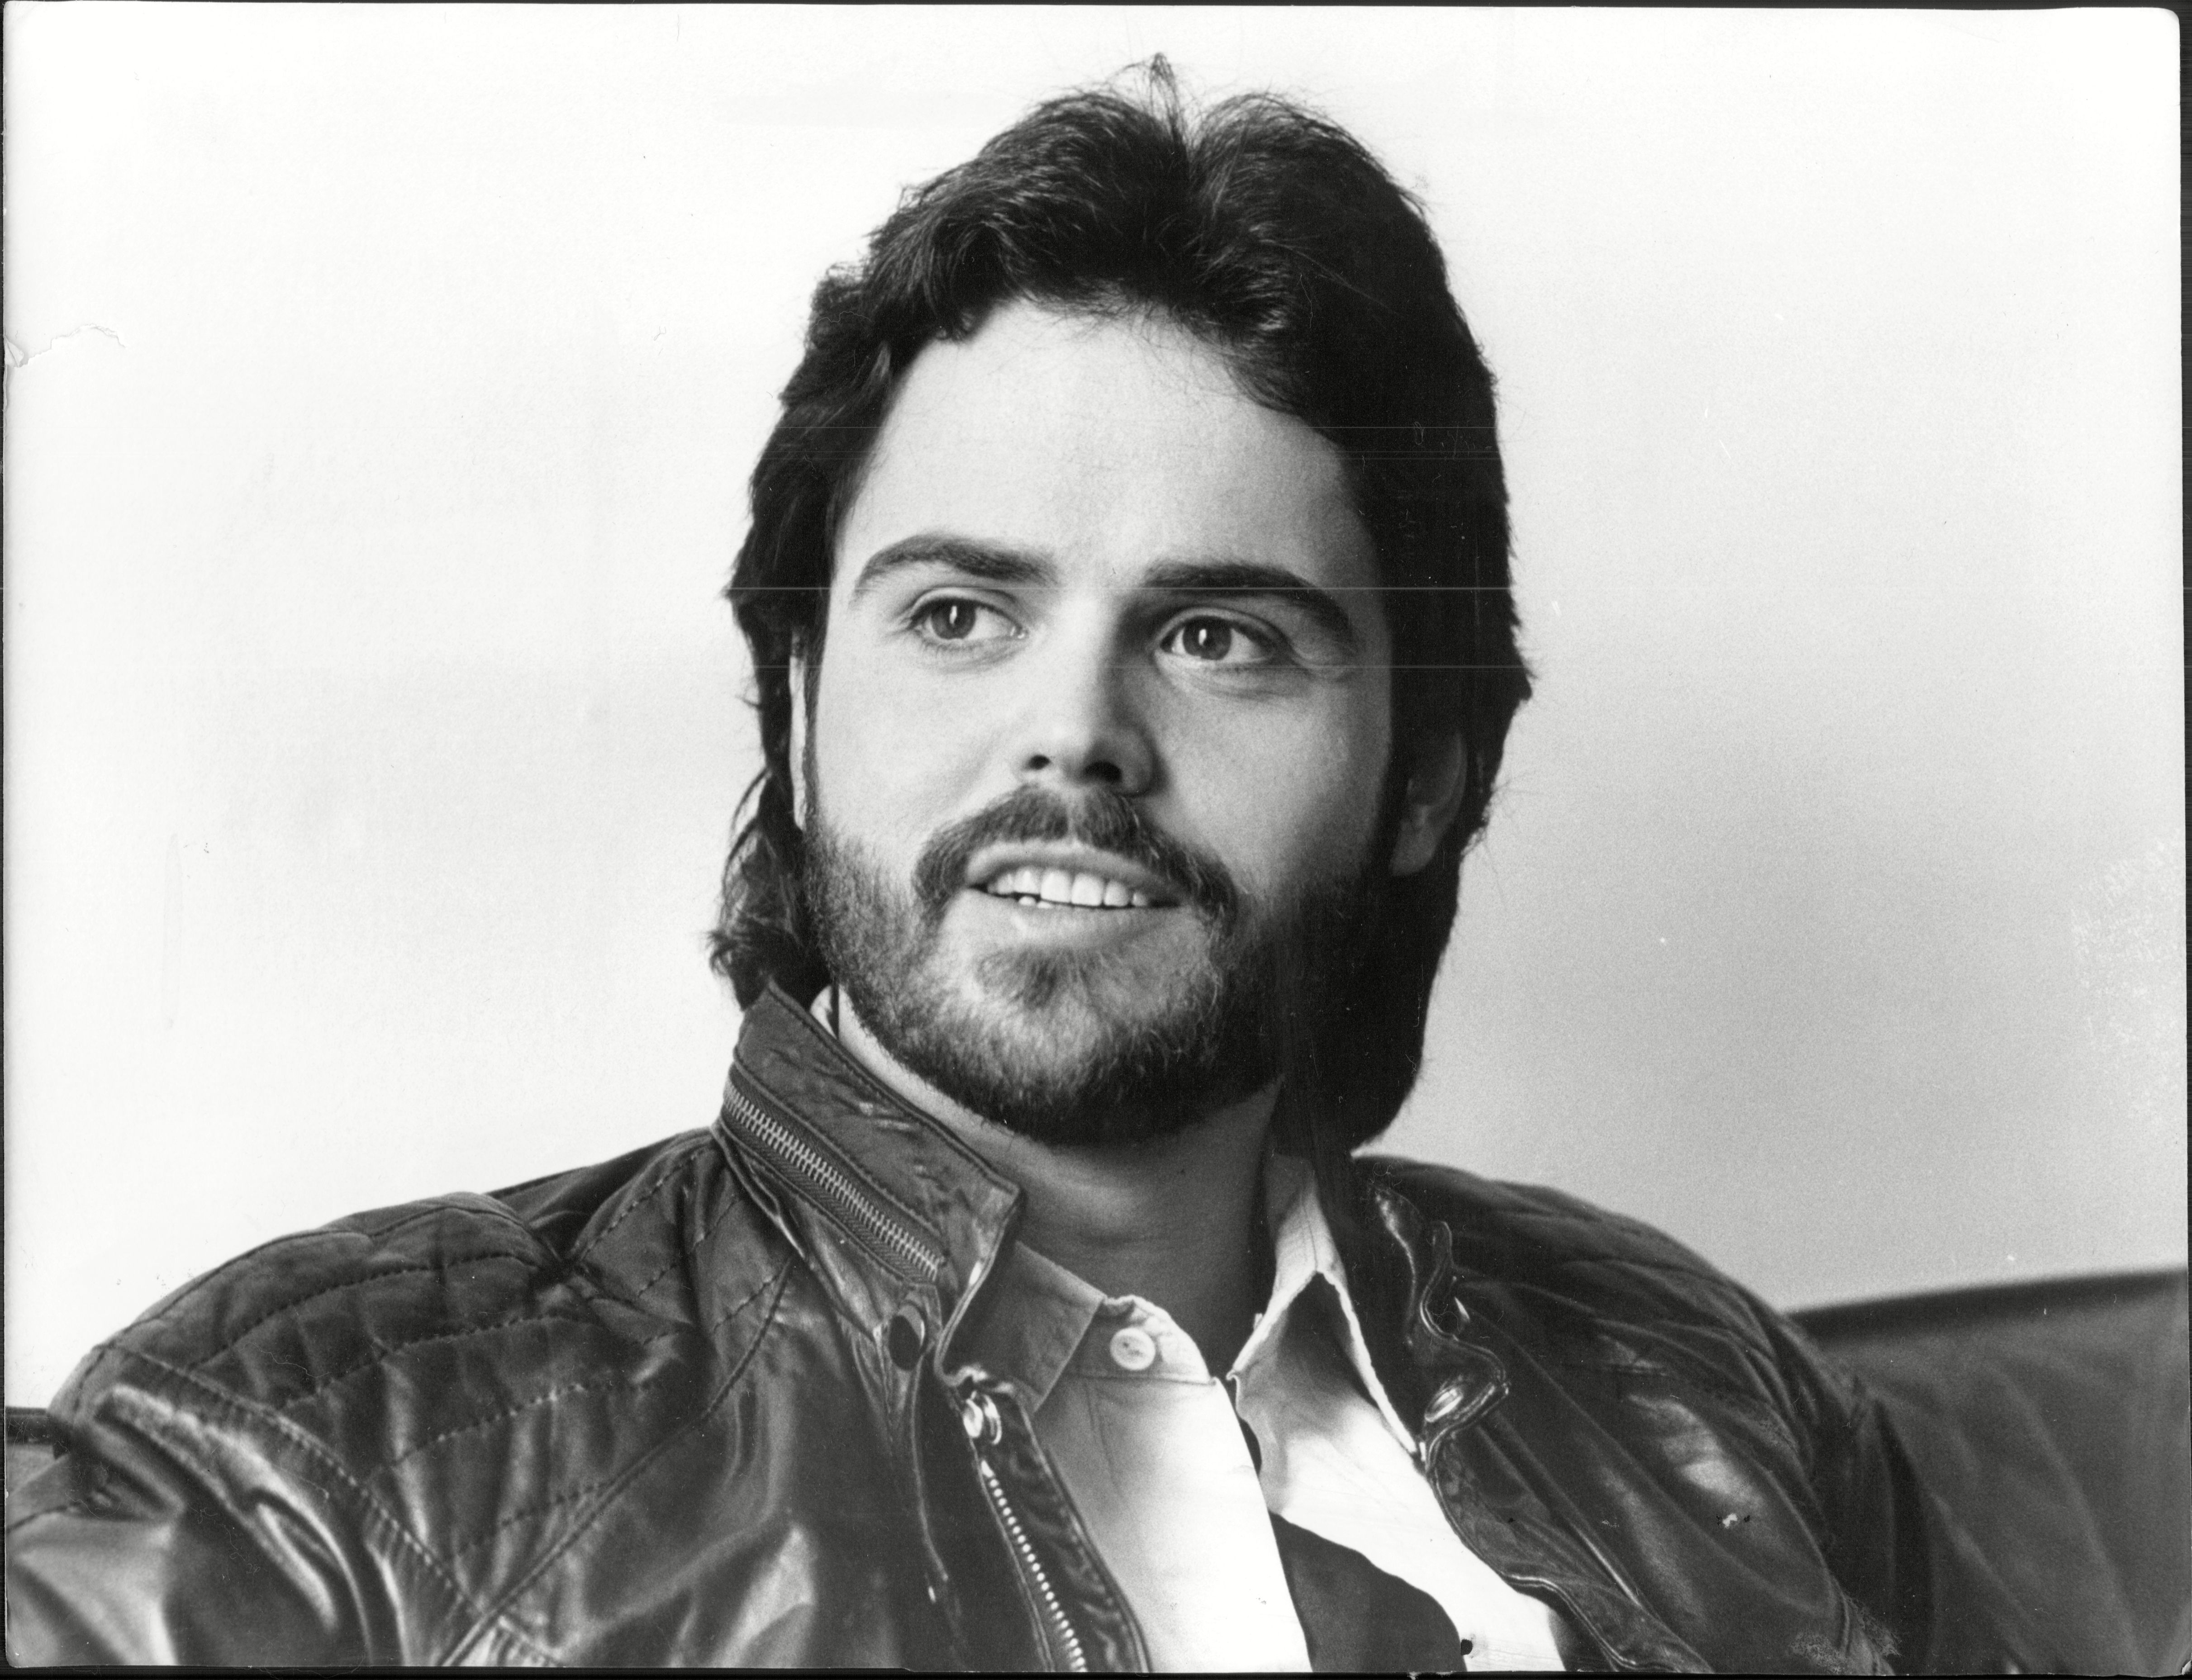 Donny Osmond's Transformation Photos of the Singer Then and Now